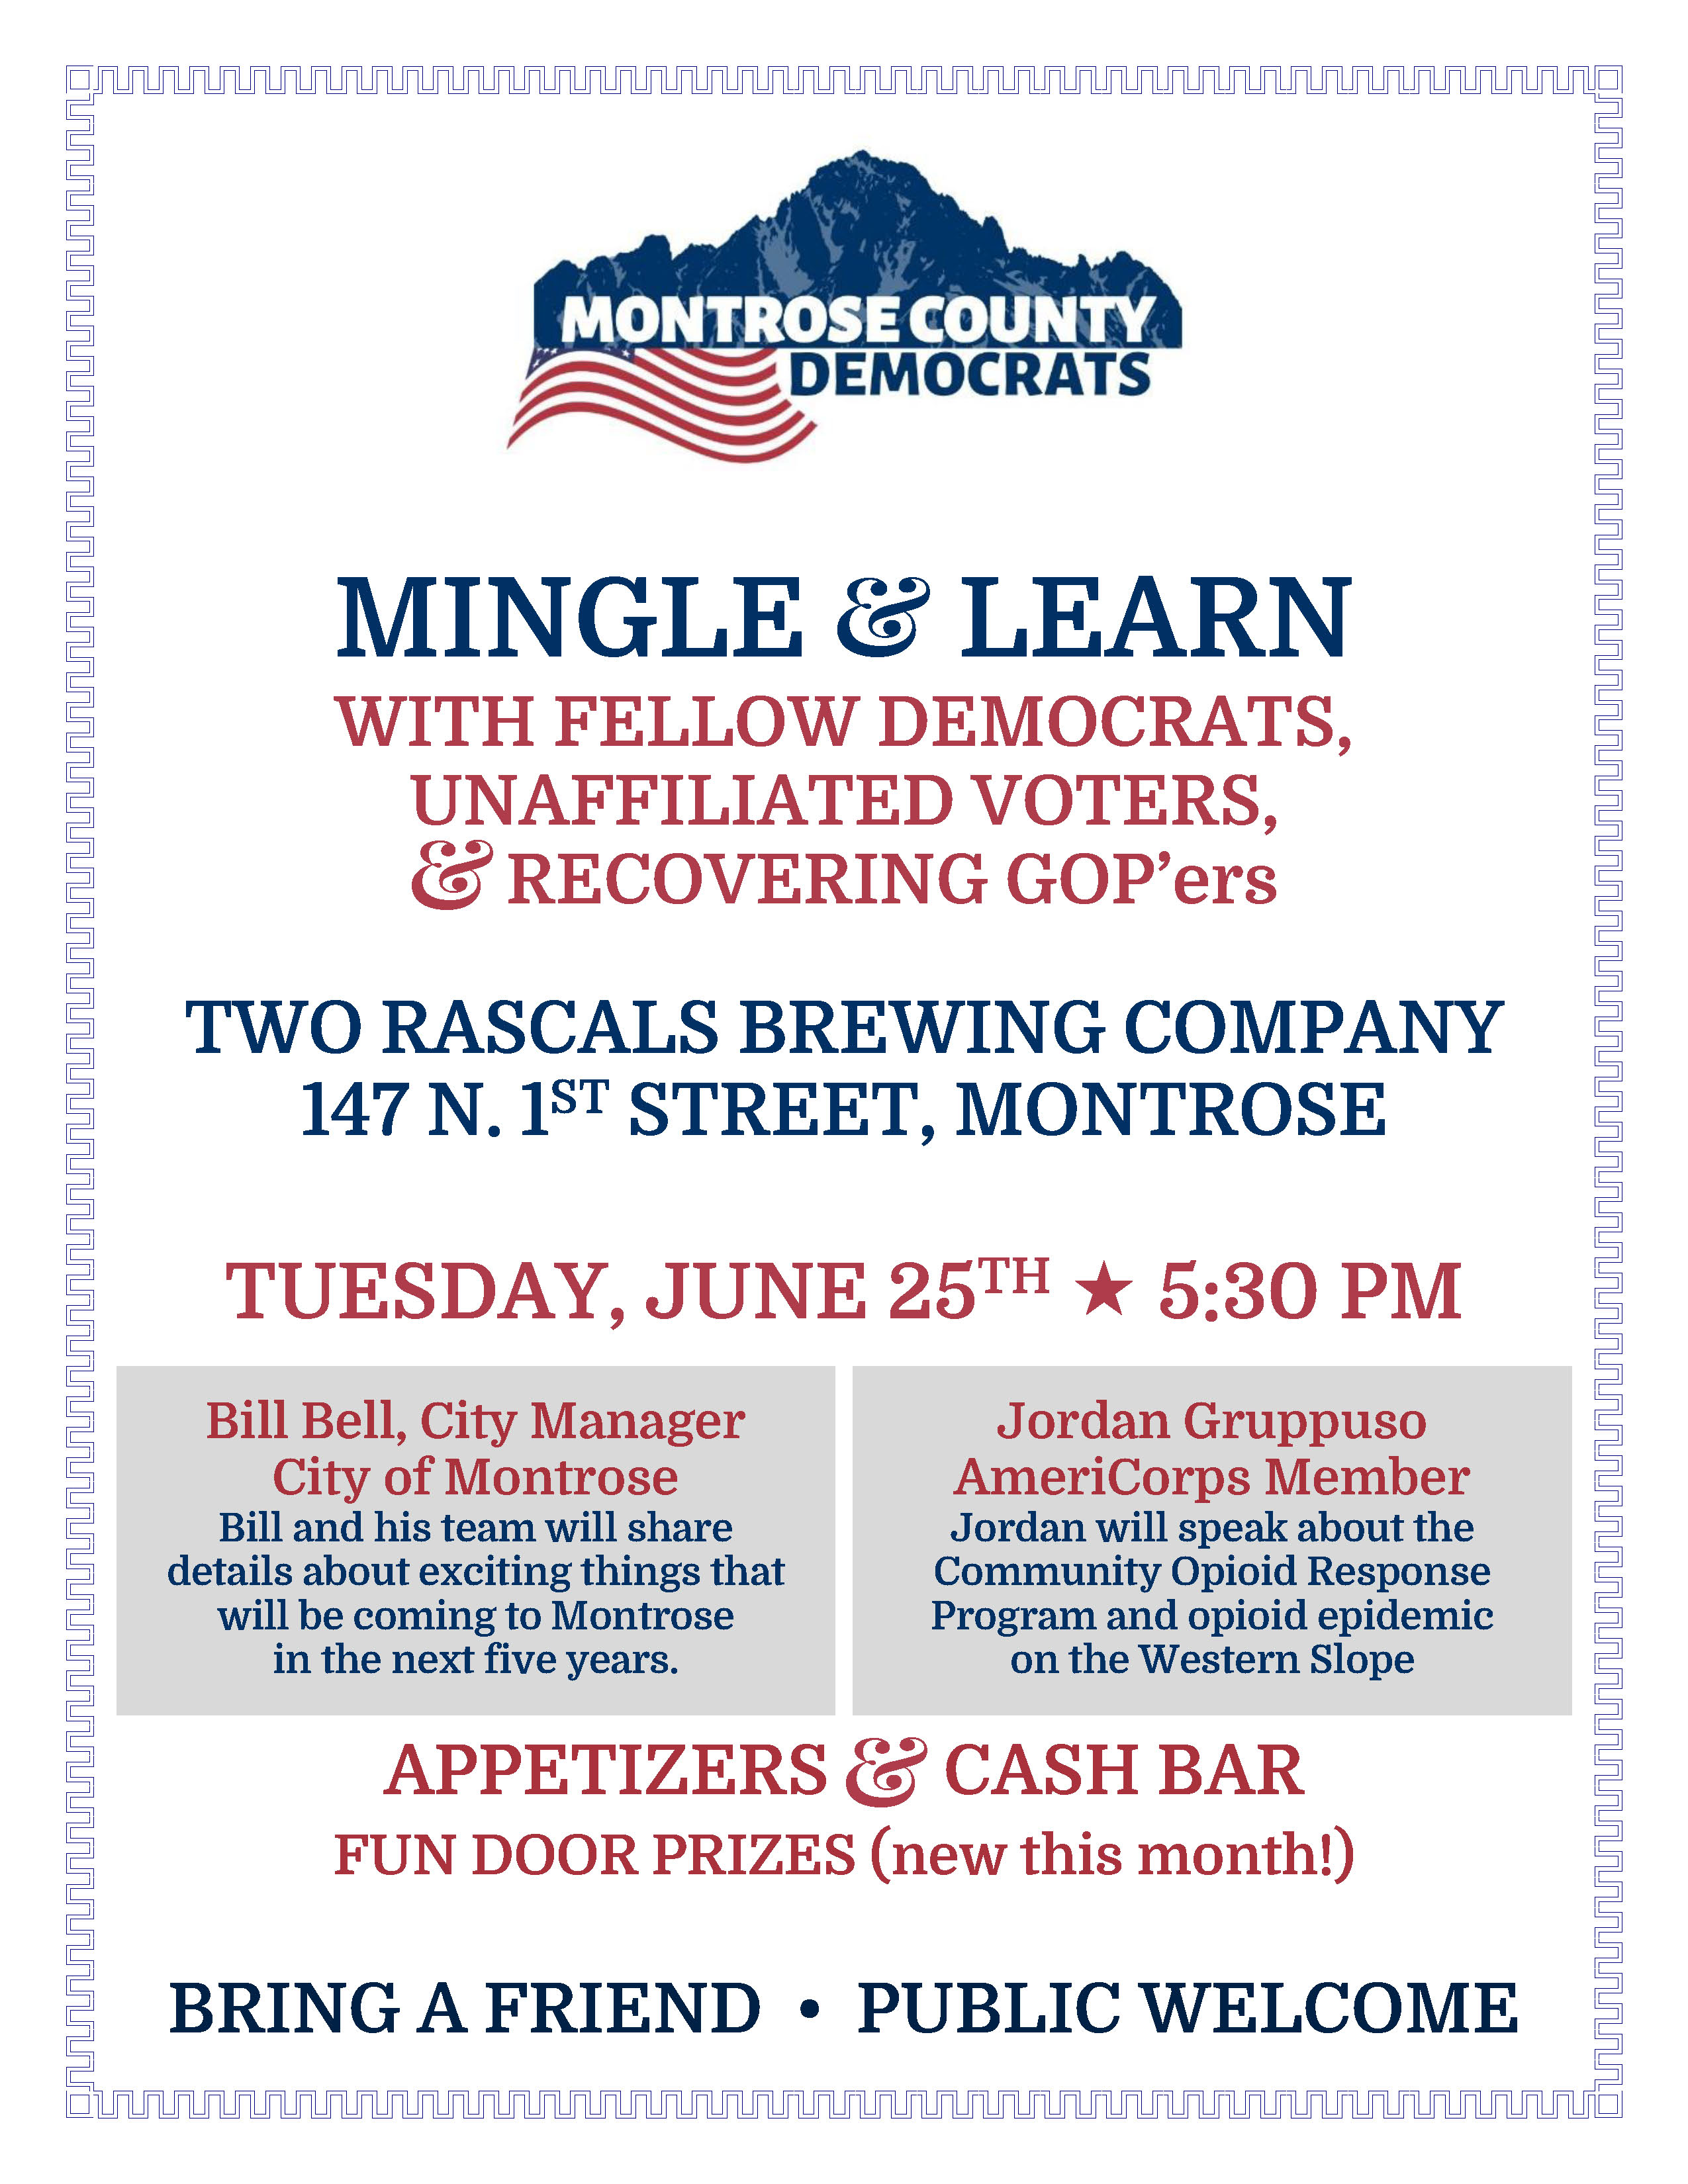 Montrose Meet & Greet | Tuesday, June 25, 2019 | Two Rascals Brewing Company